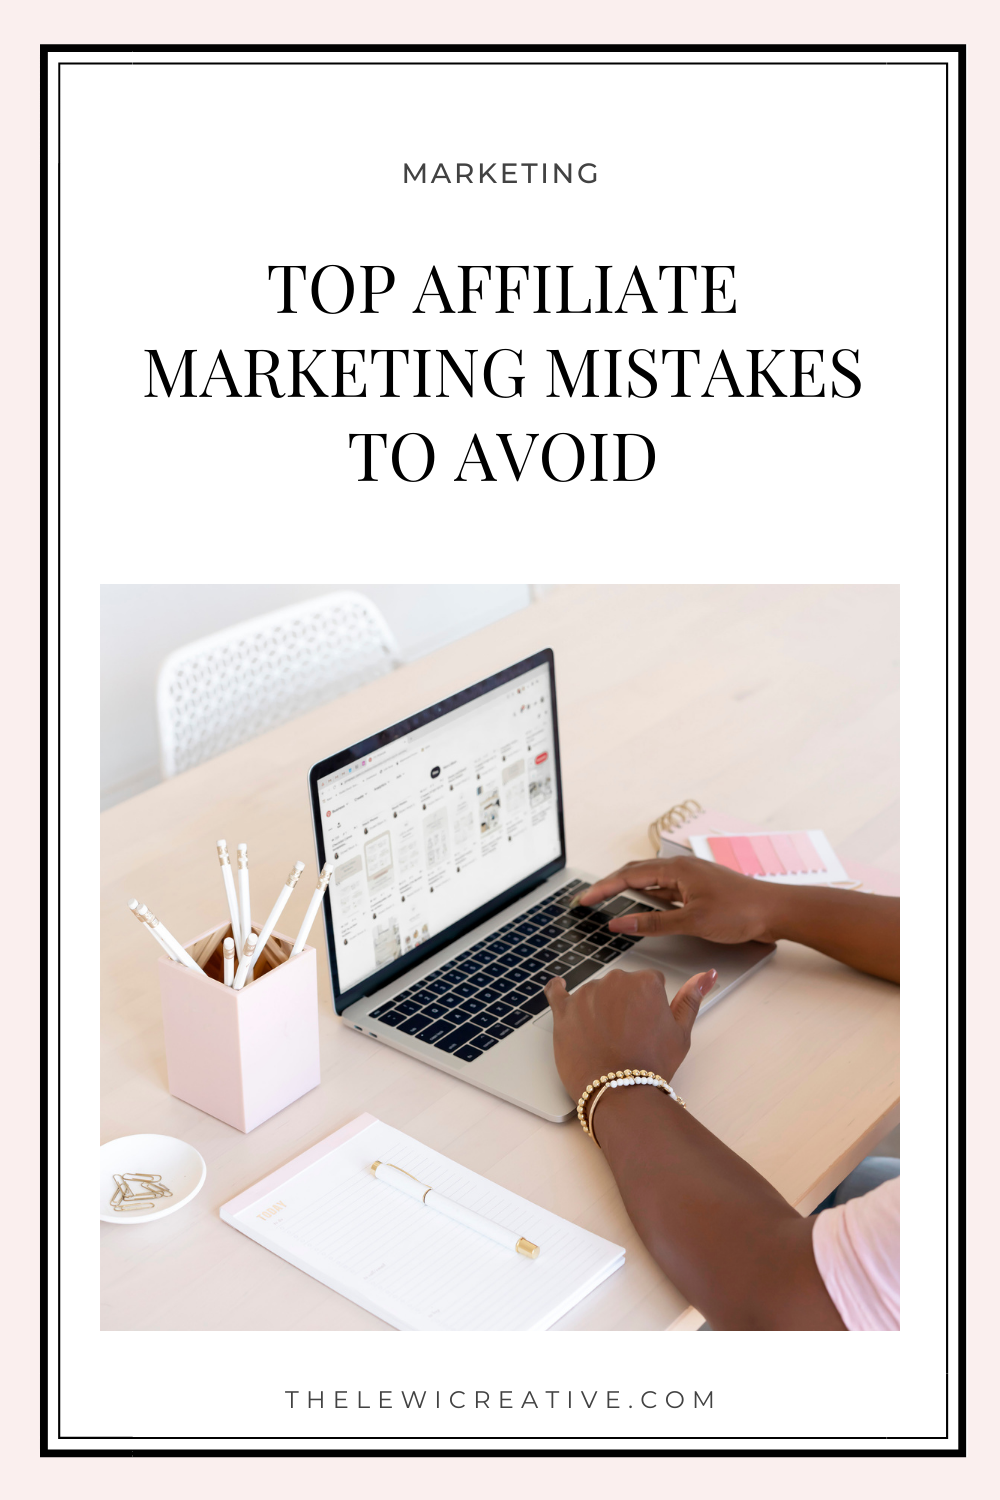 9 Common Affiliate Marketing Mistakes and How To Avoid Them